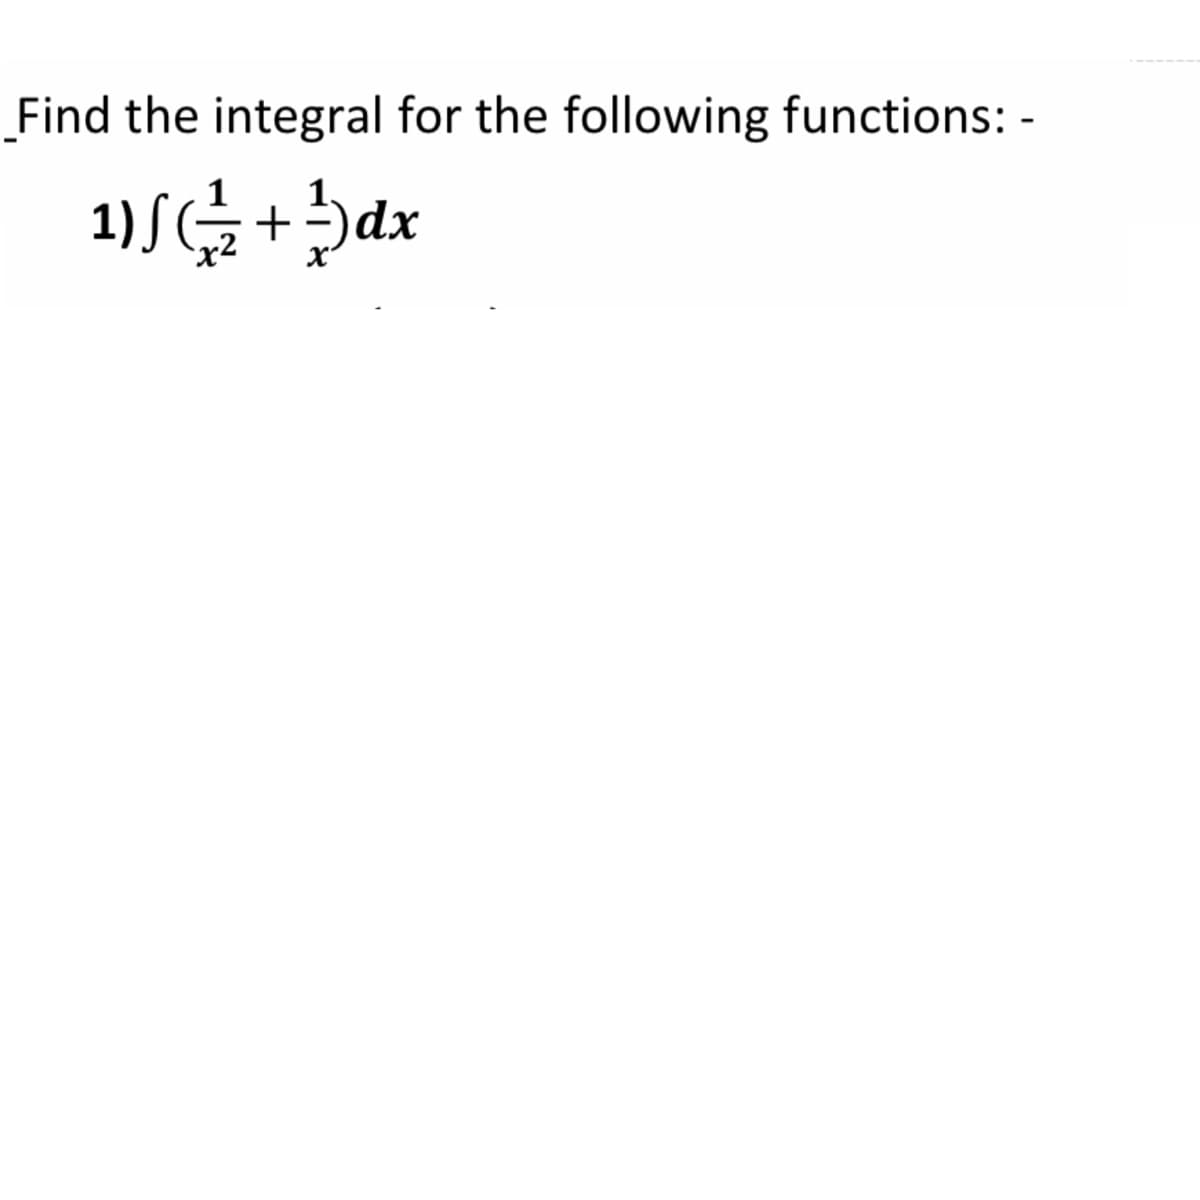 Find the integral for the following functions: -
1) SG+5ax
